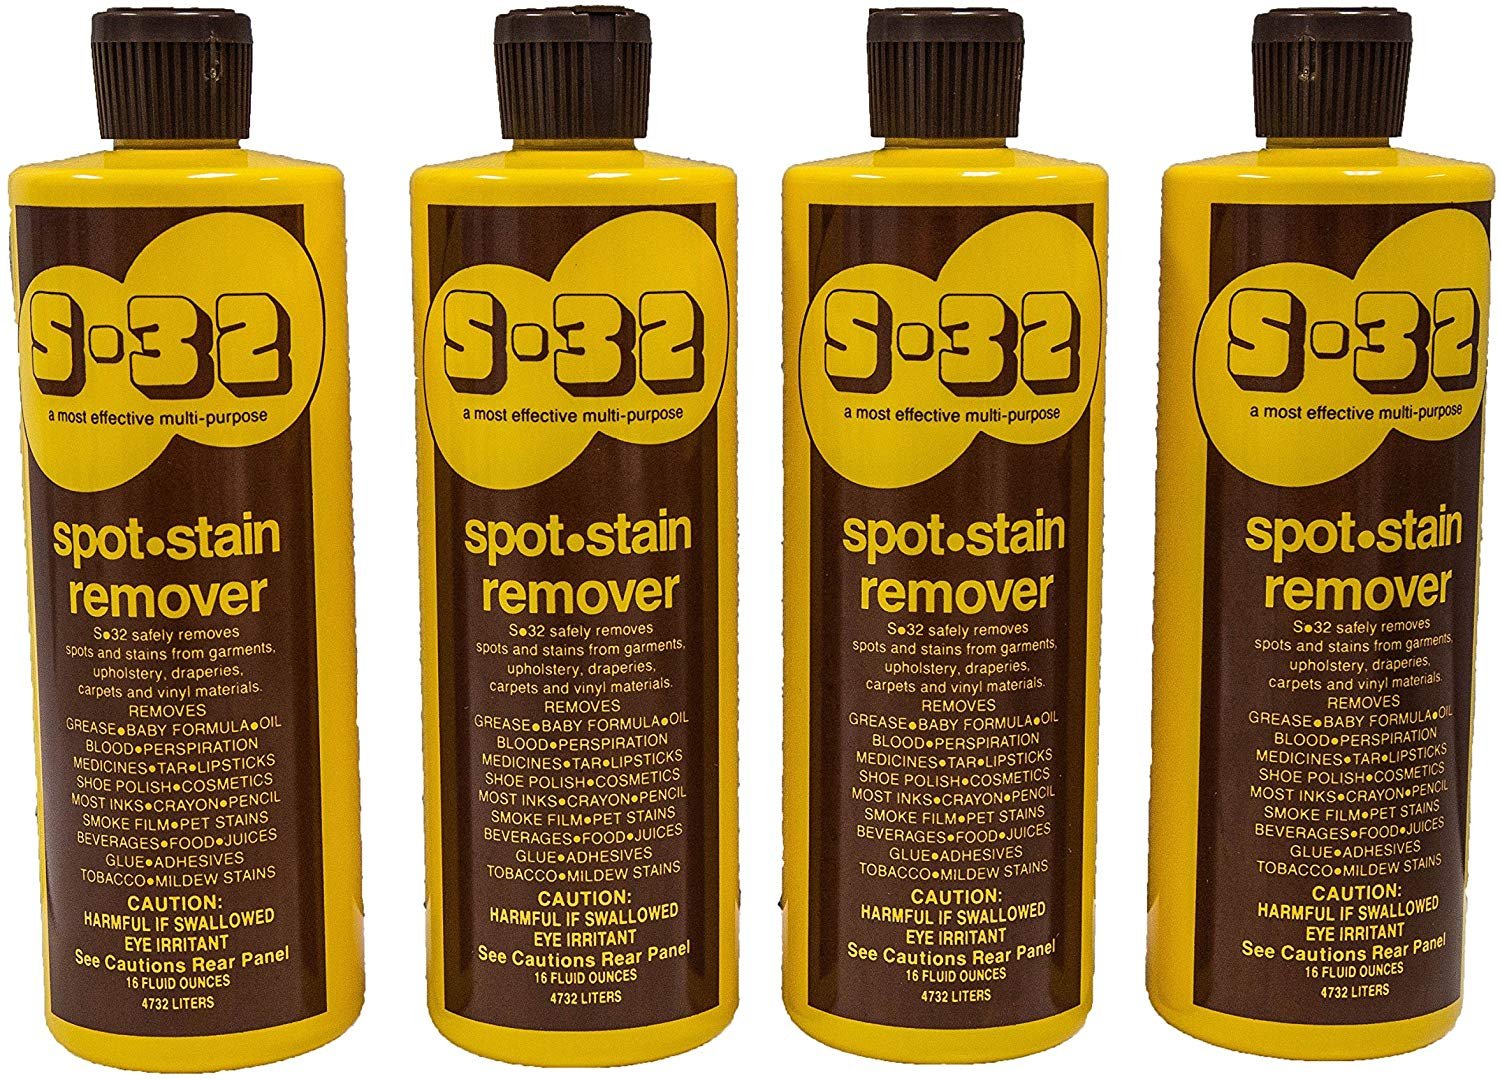 S-32 Spot Stain Remover 4 Pack